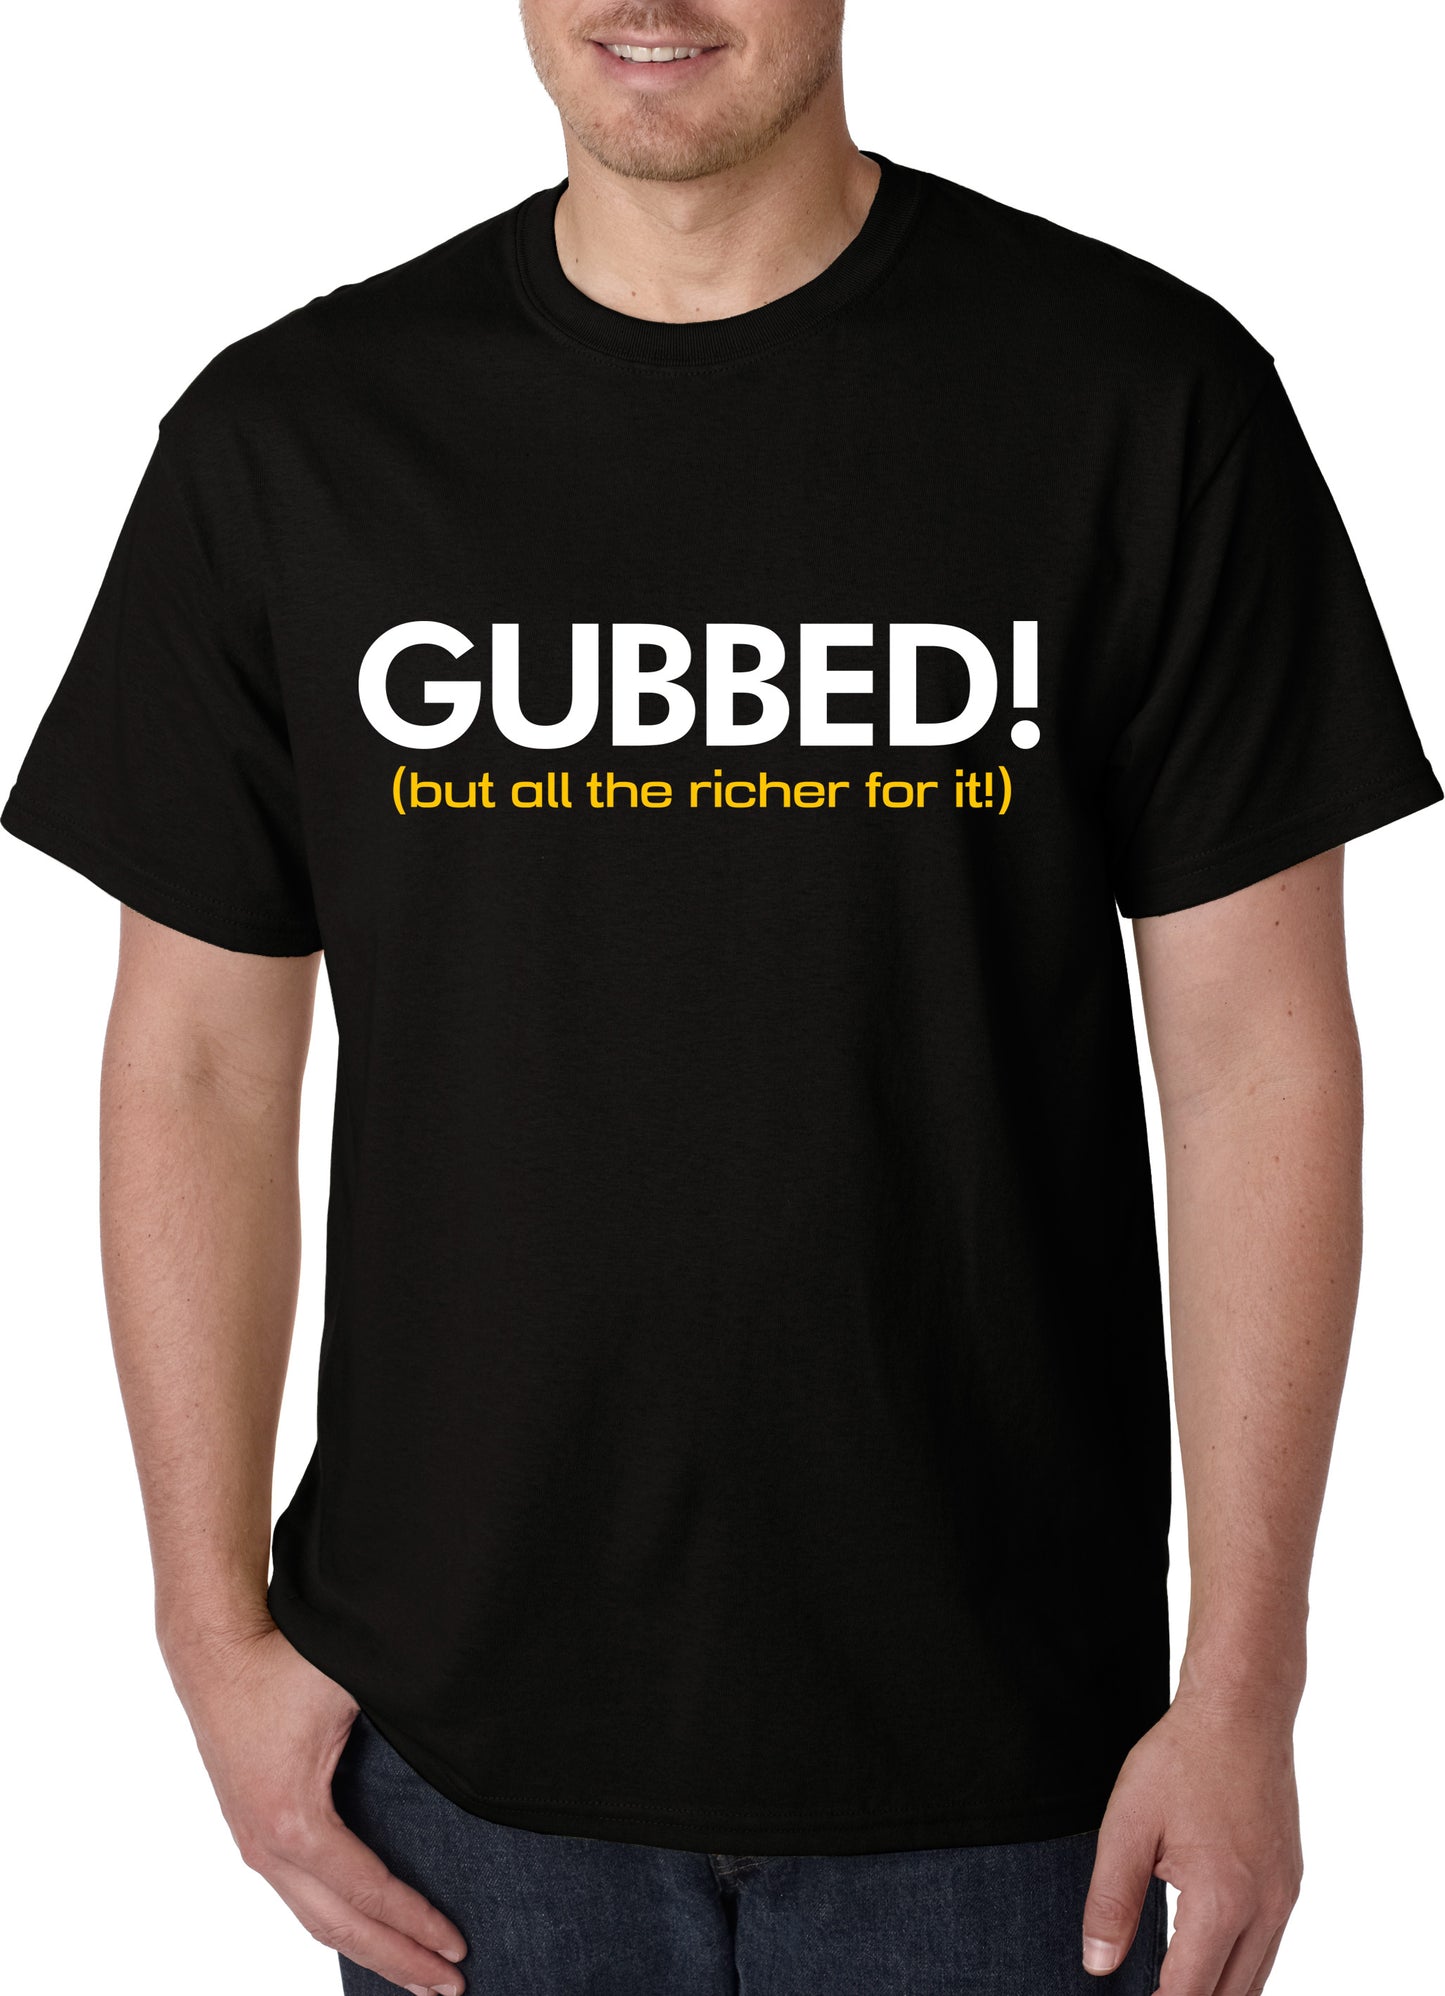 Gubbed! (but all the richer for it!) t-shirt